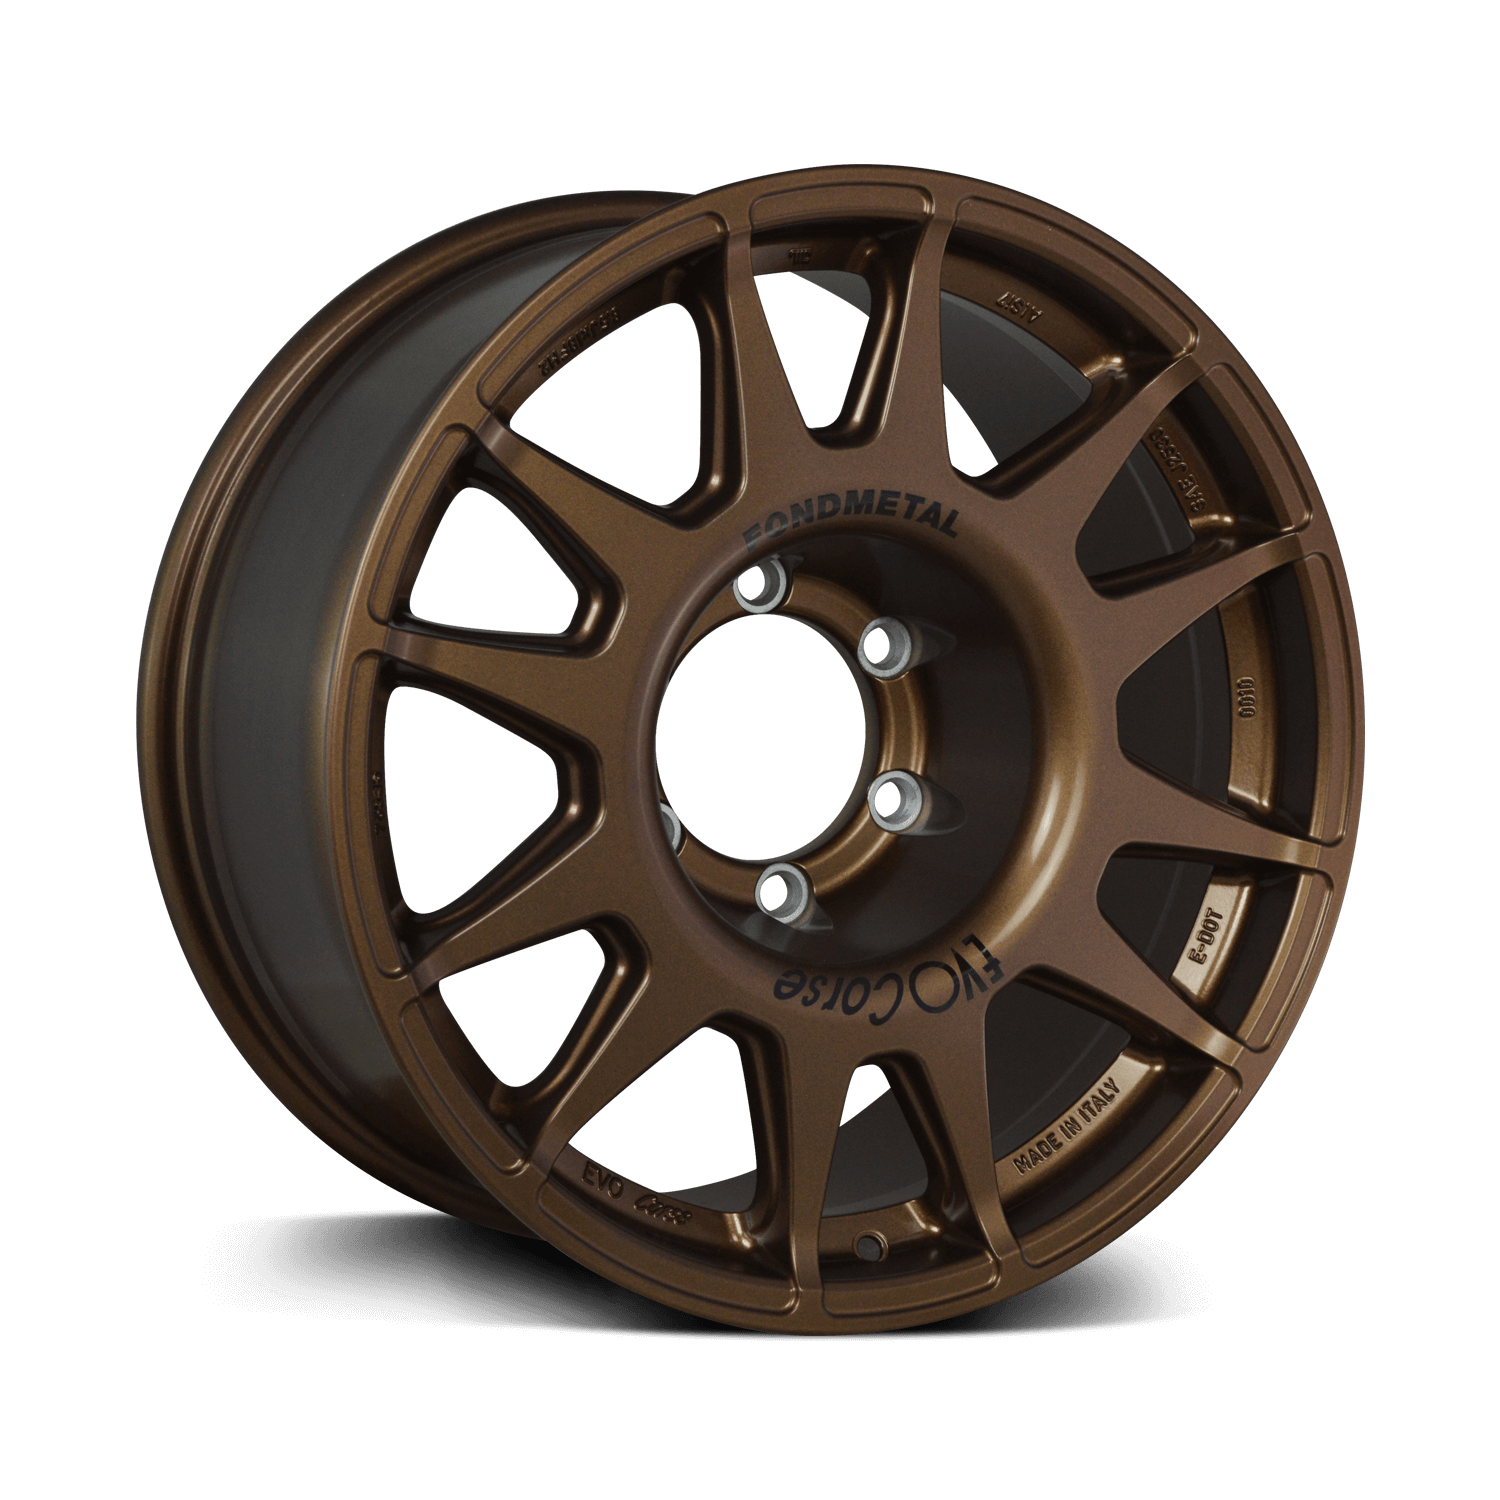 Evo Corse wheel axo view mat bronze, for toyota land cruiser 300 series. the 4x4 off road allow wheel with the highest high load rating for overlanding, rally, 4wd expedition use in australia